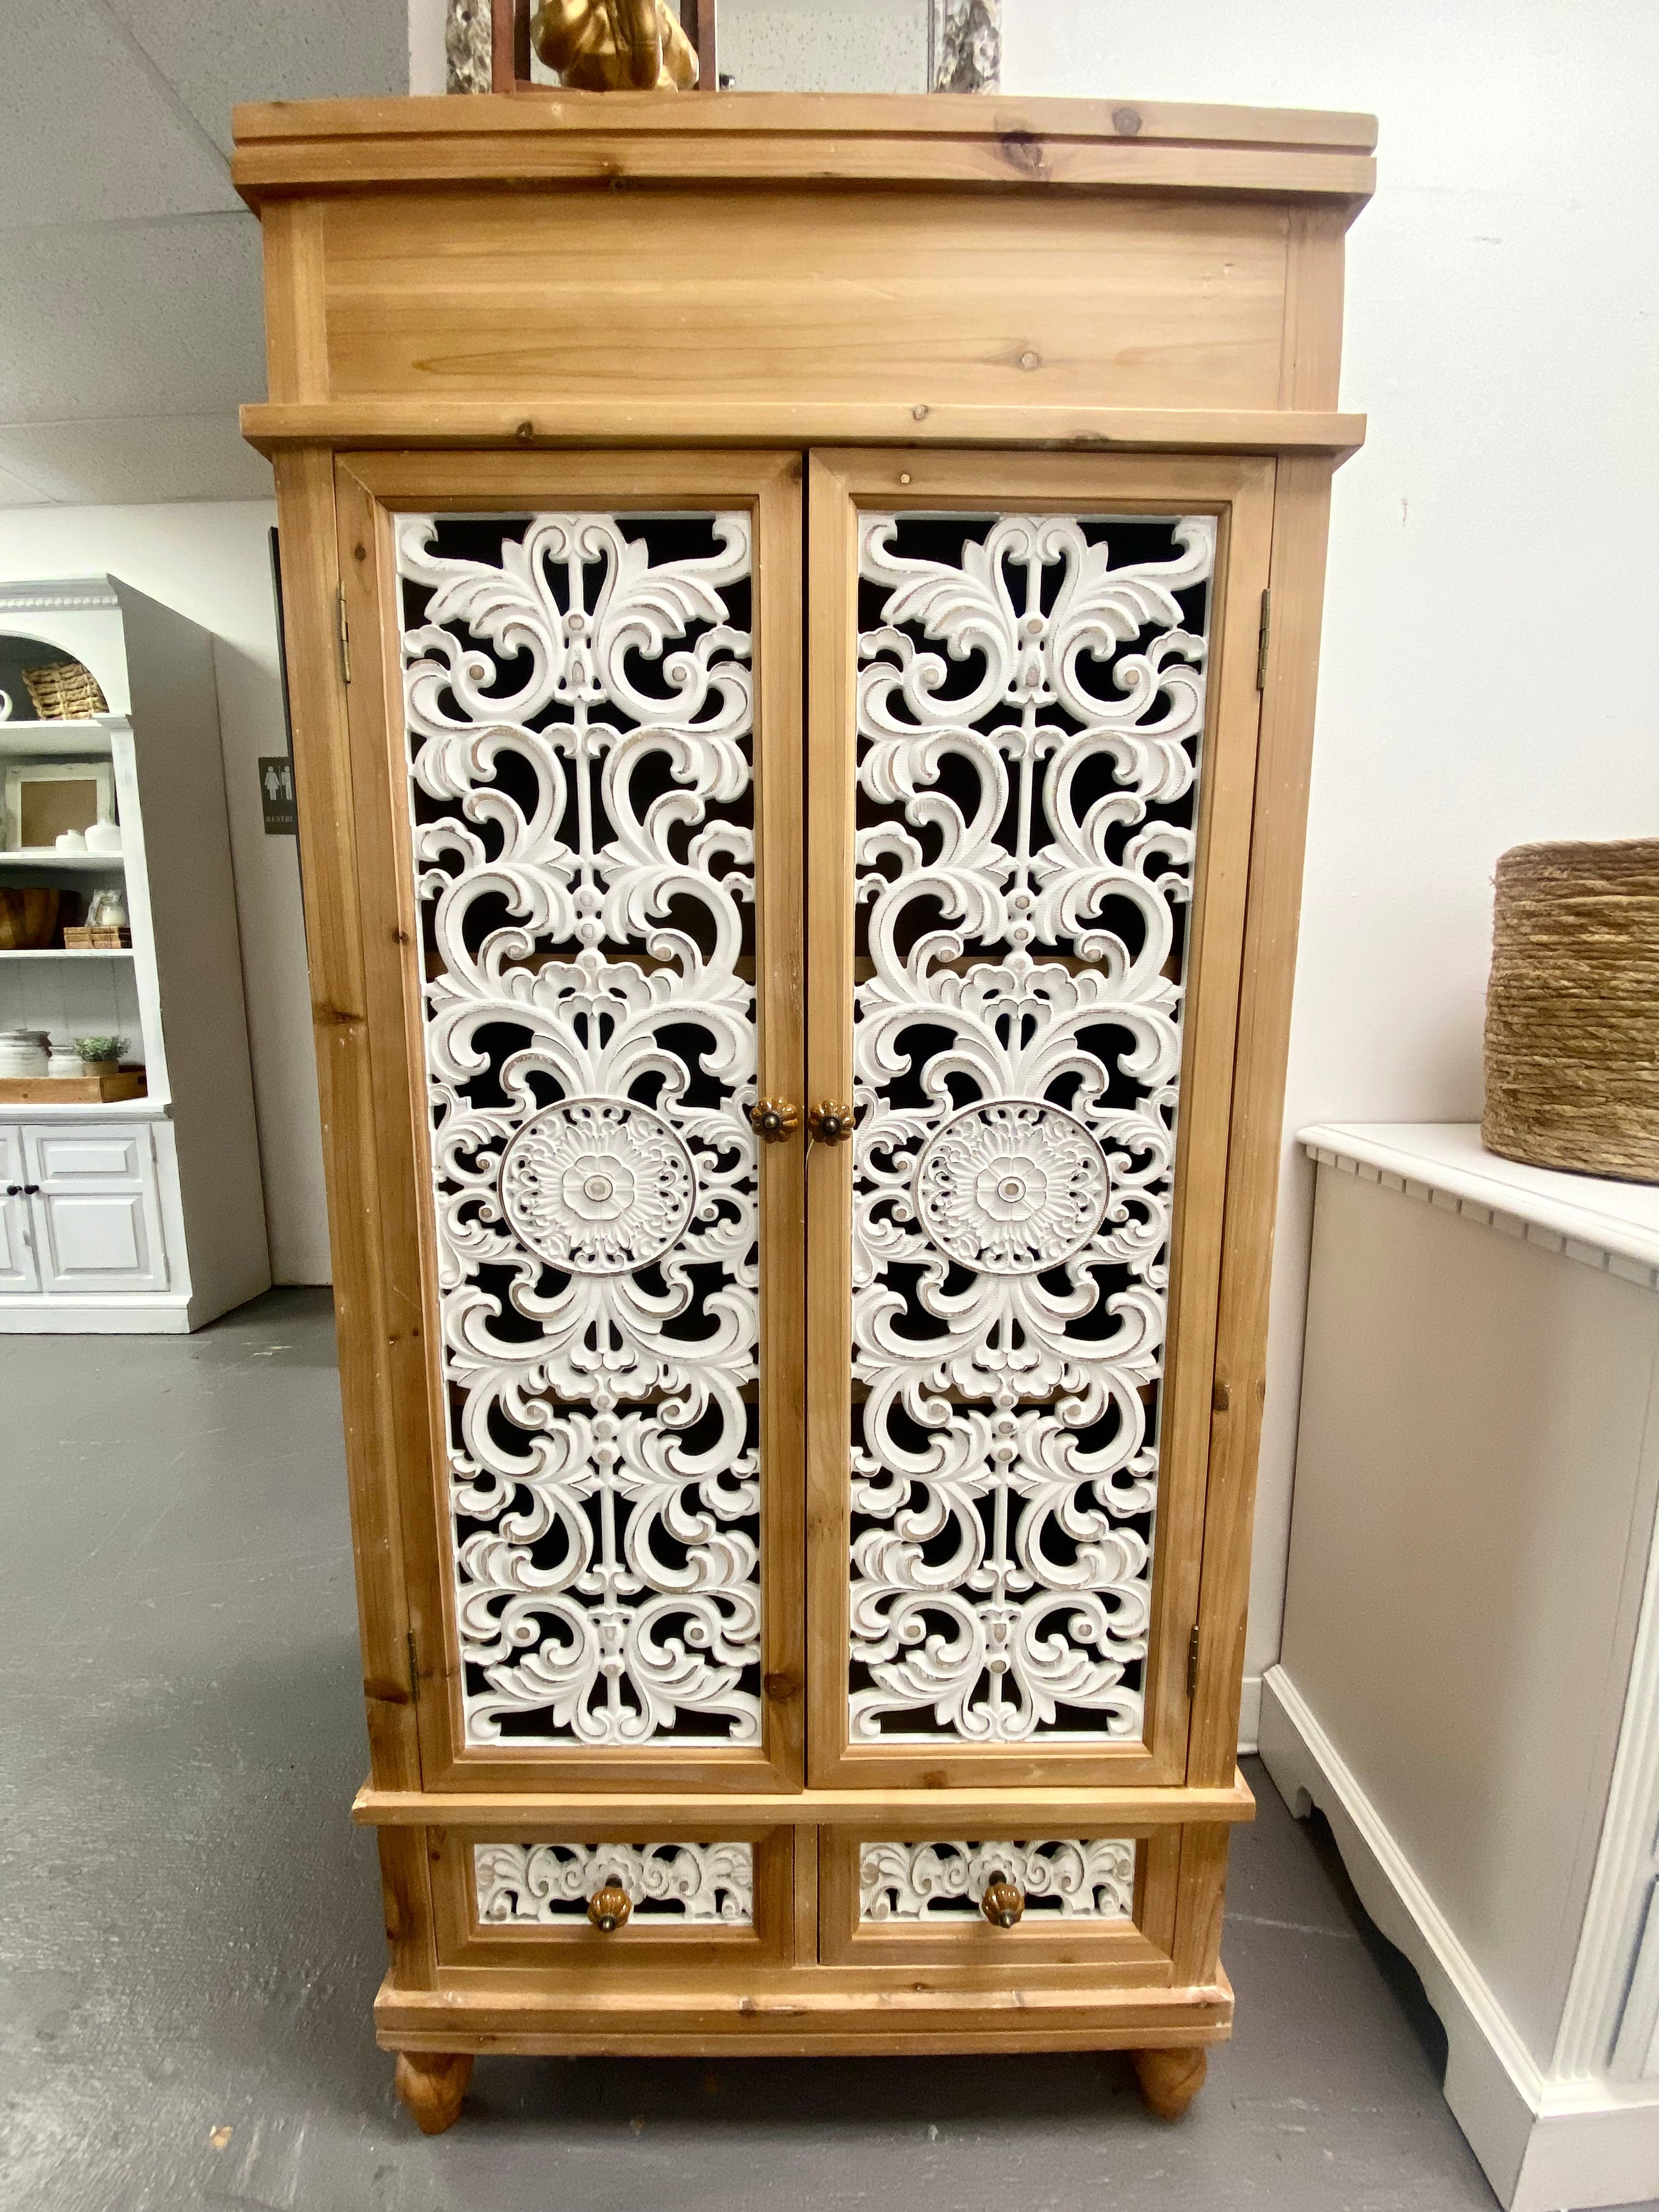 Ornate hollow-carved wooden cabinet